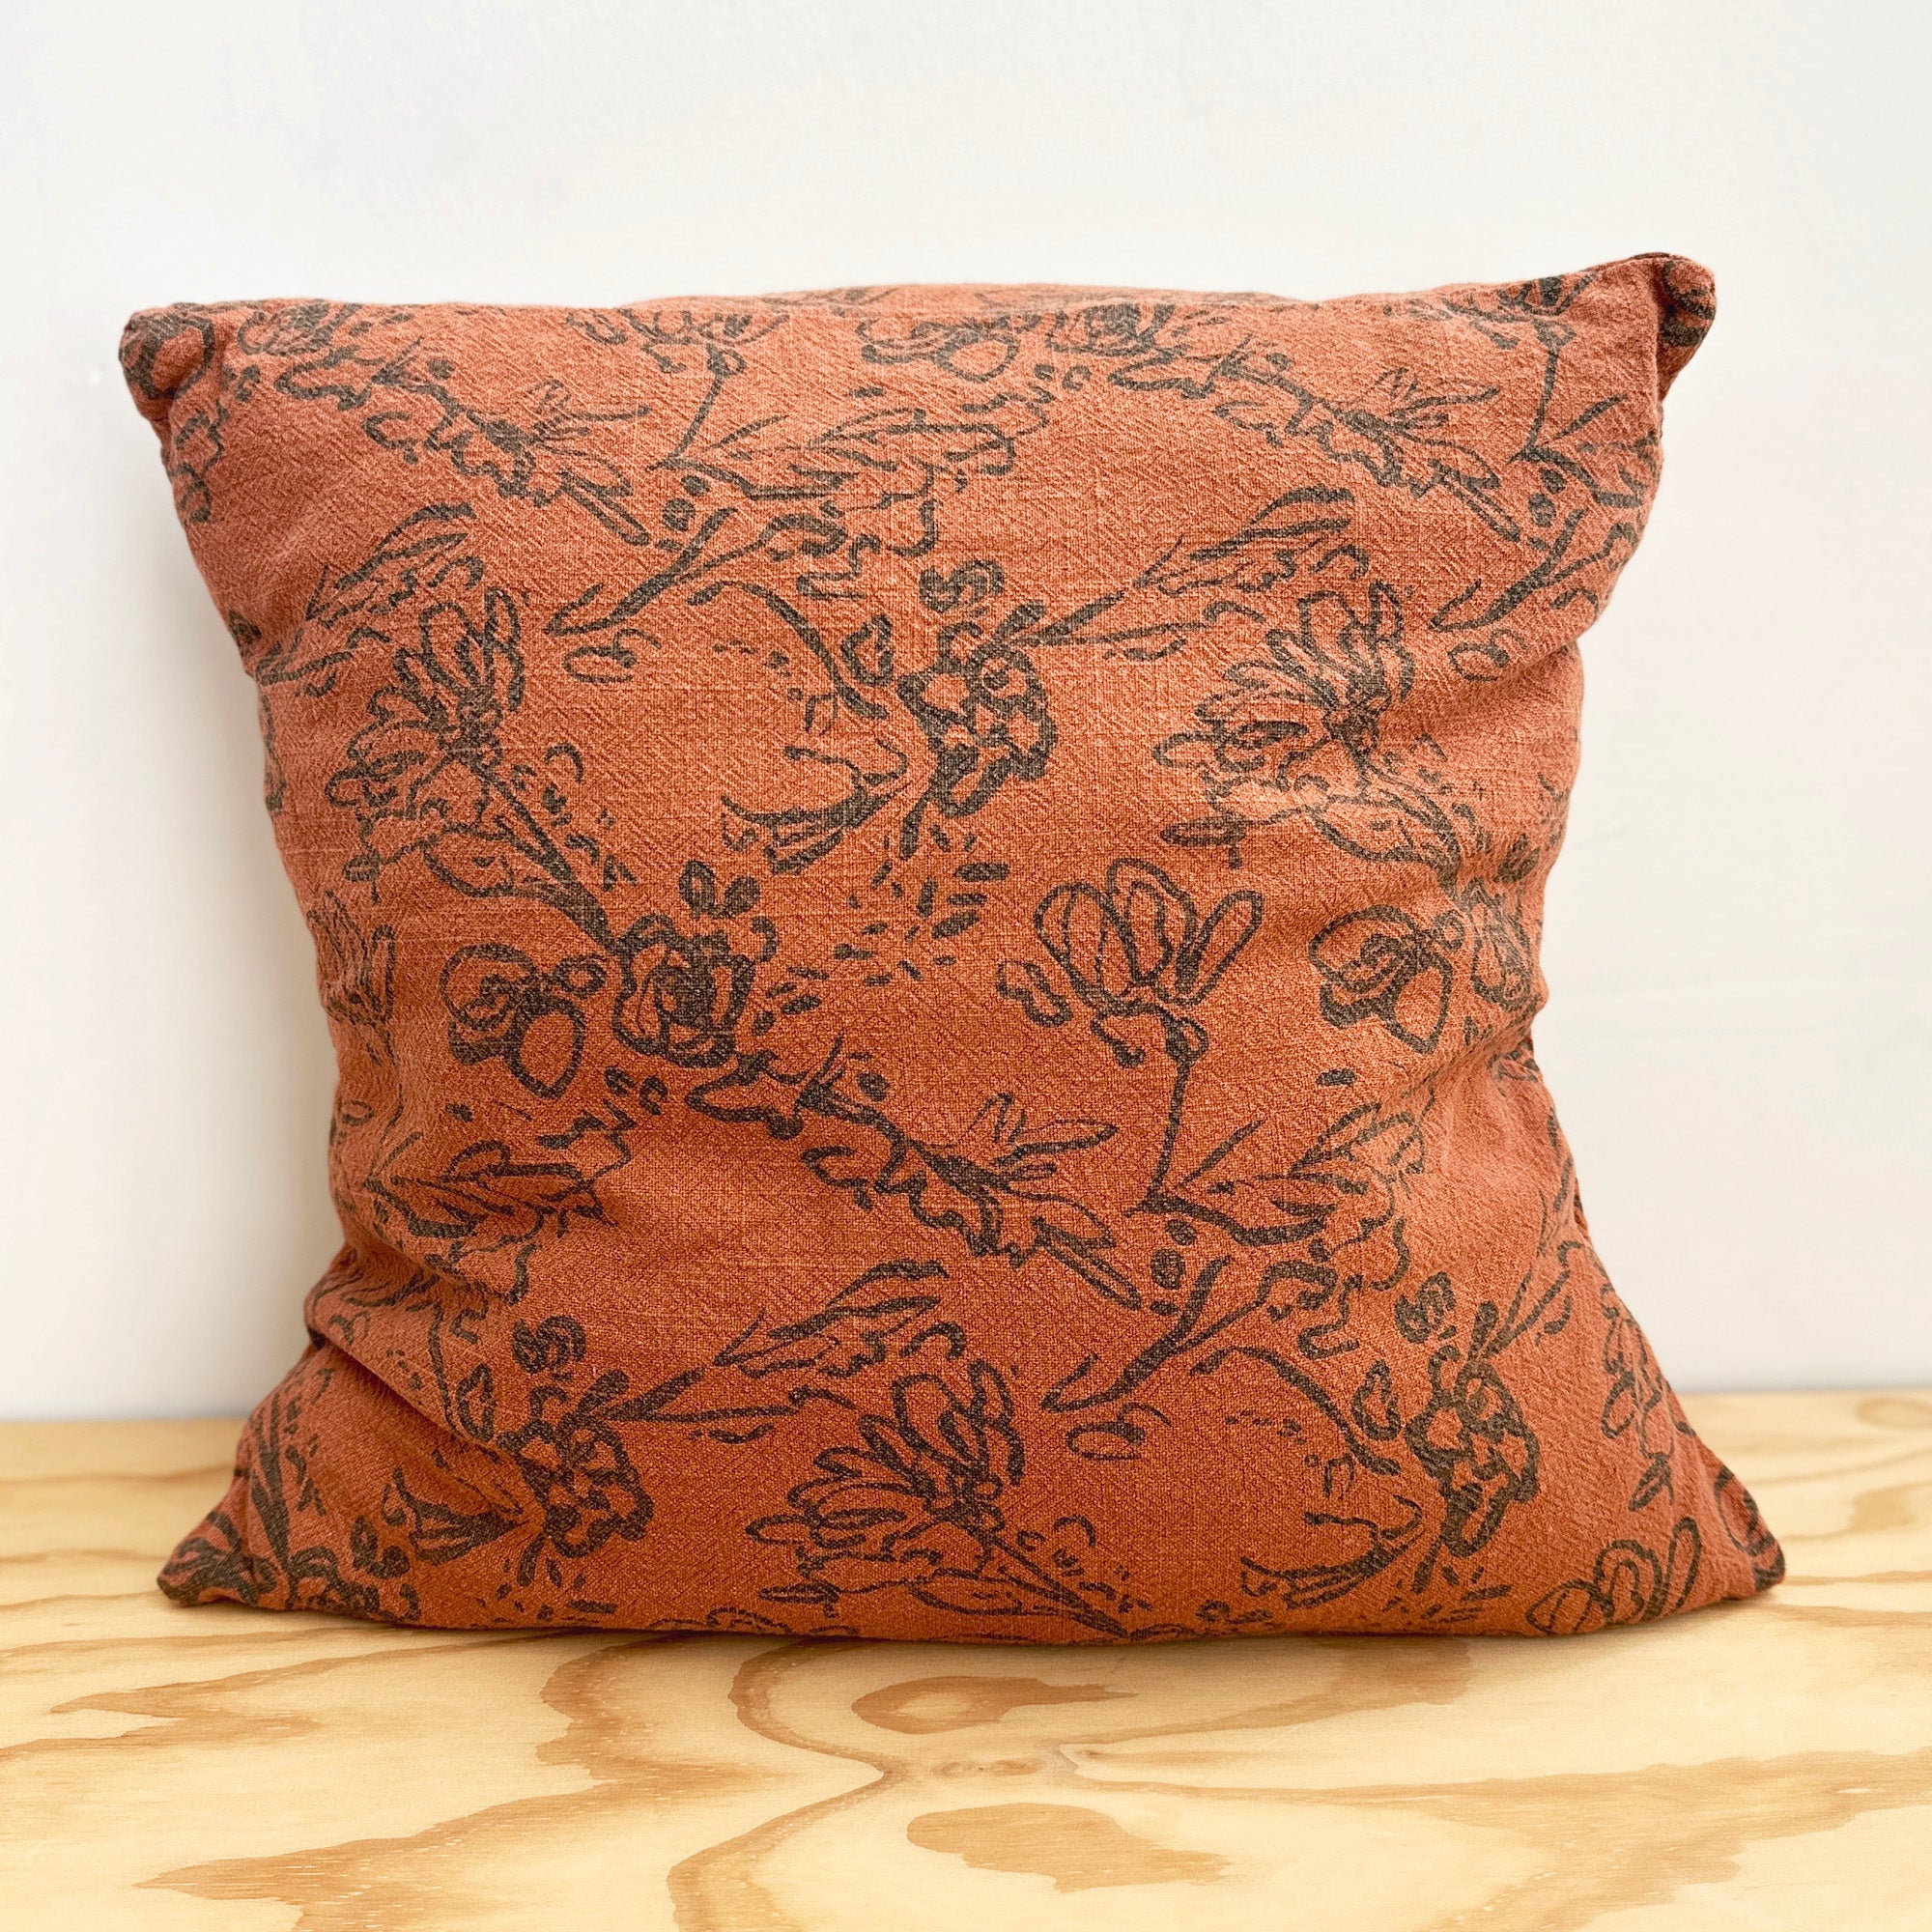 The Square Throw Pillow - Lattice in Pine and Burnt Sienna